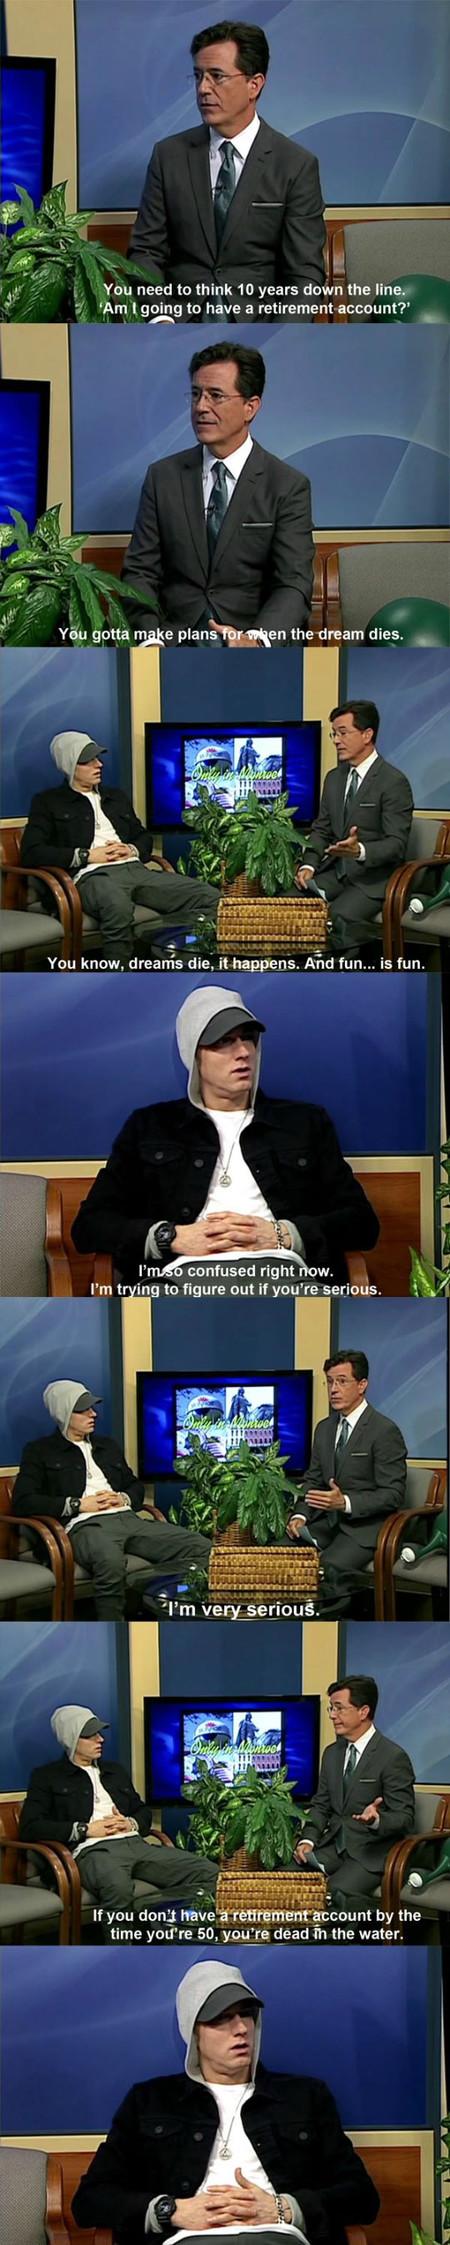 Colbert+And+Eminem+In+The+Same+Room